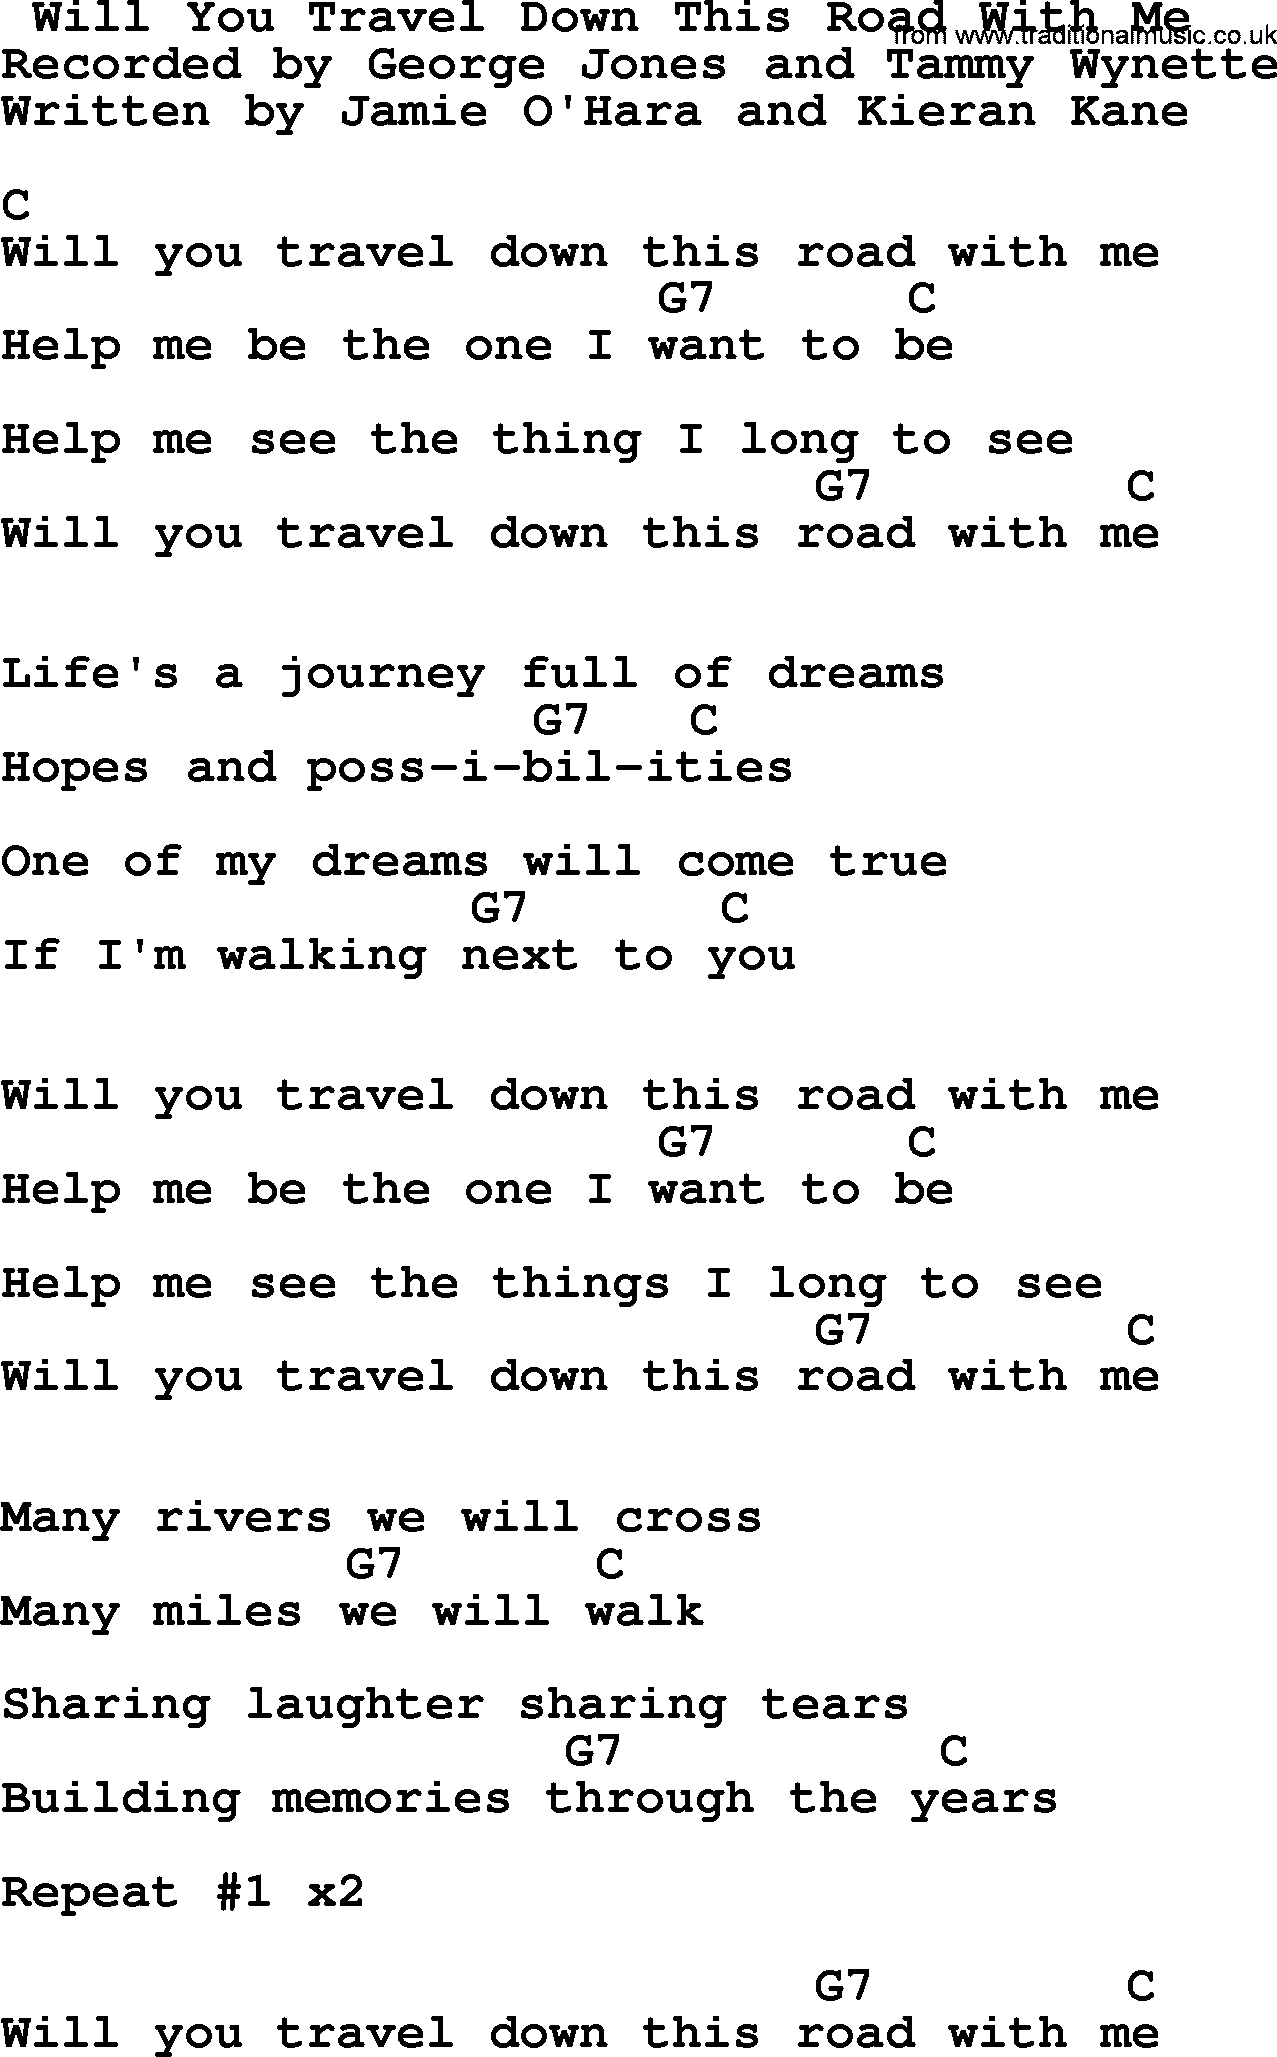 George Jones song: Will You Travel Down This Road With Me, lyrics and chords